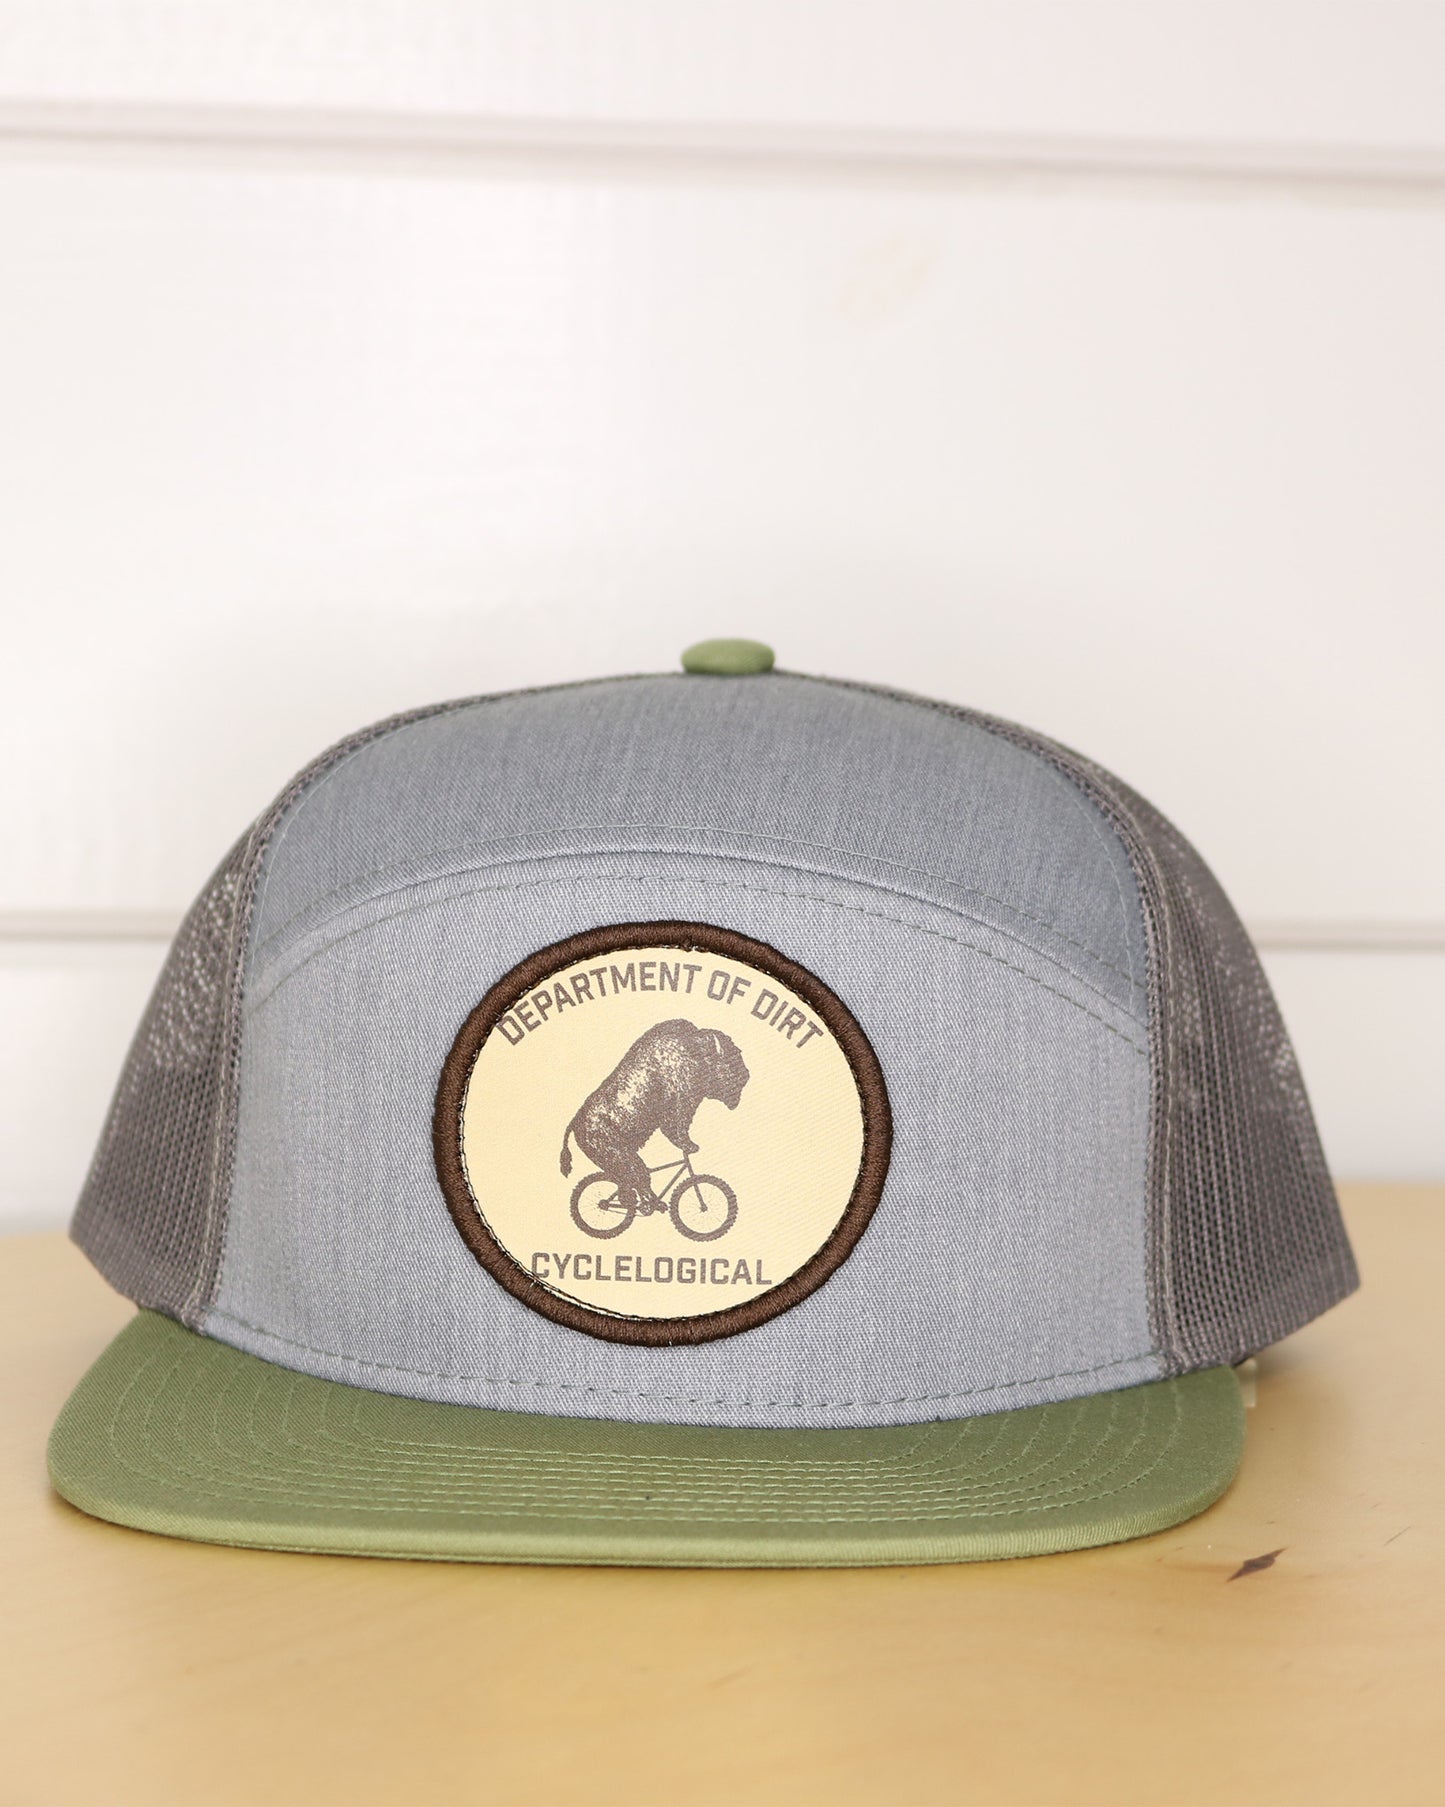 Department of Dirt Green Snapback Hat Front